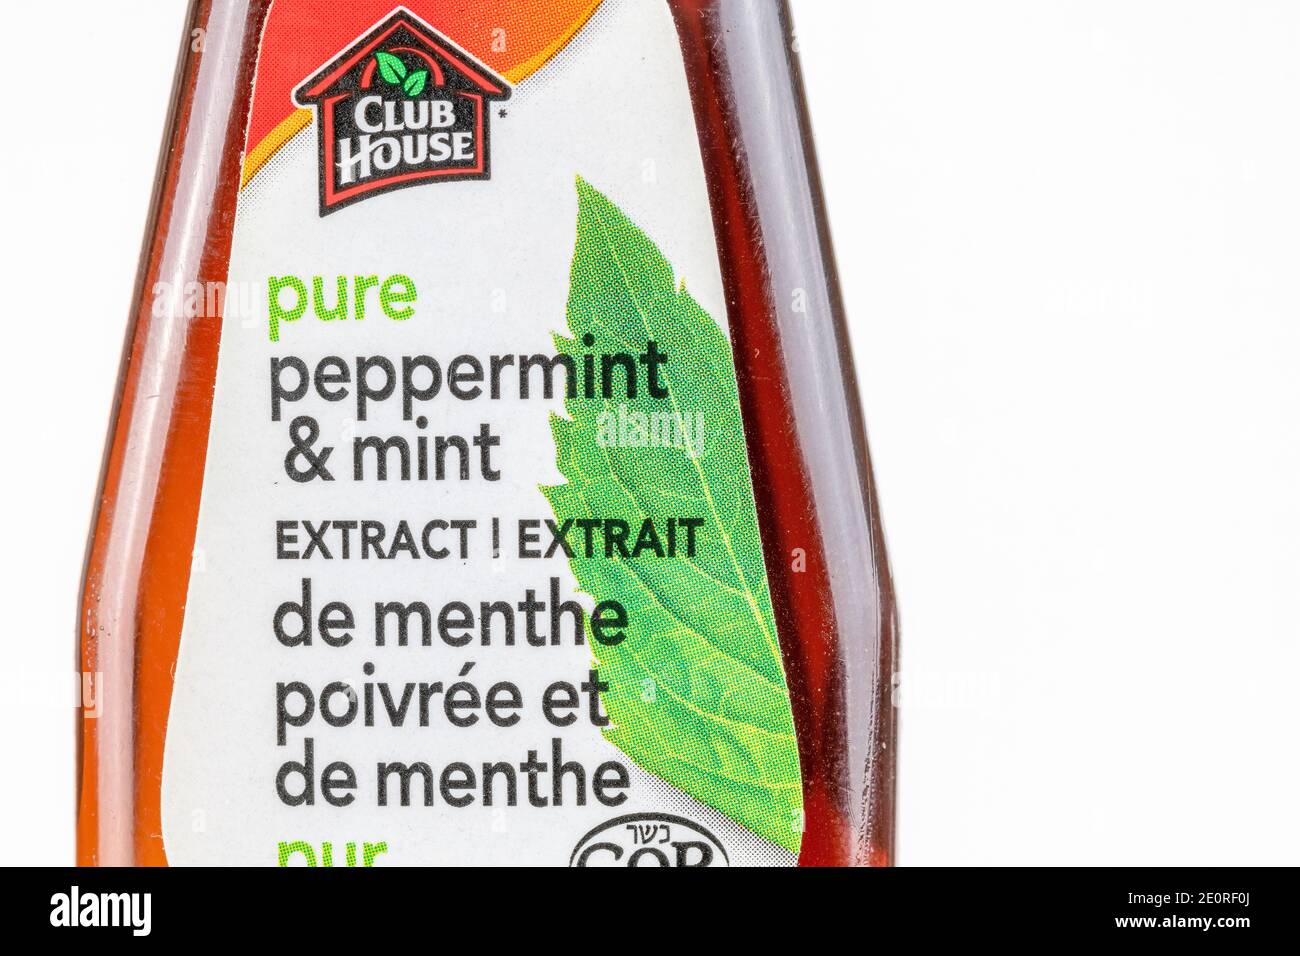 In this photo illustration, the front view of a Club House bottle of Pure Peppermint and Mint extract Stock Photo